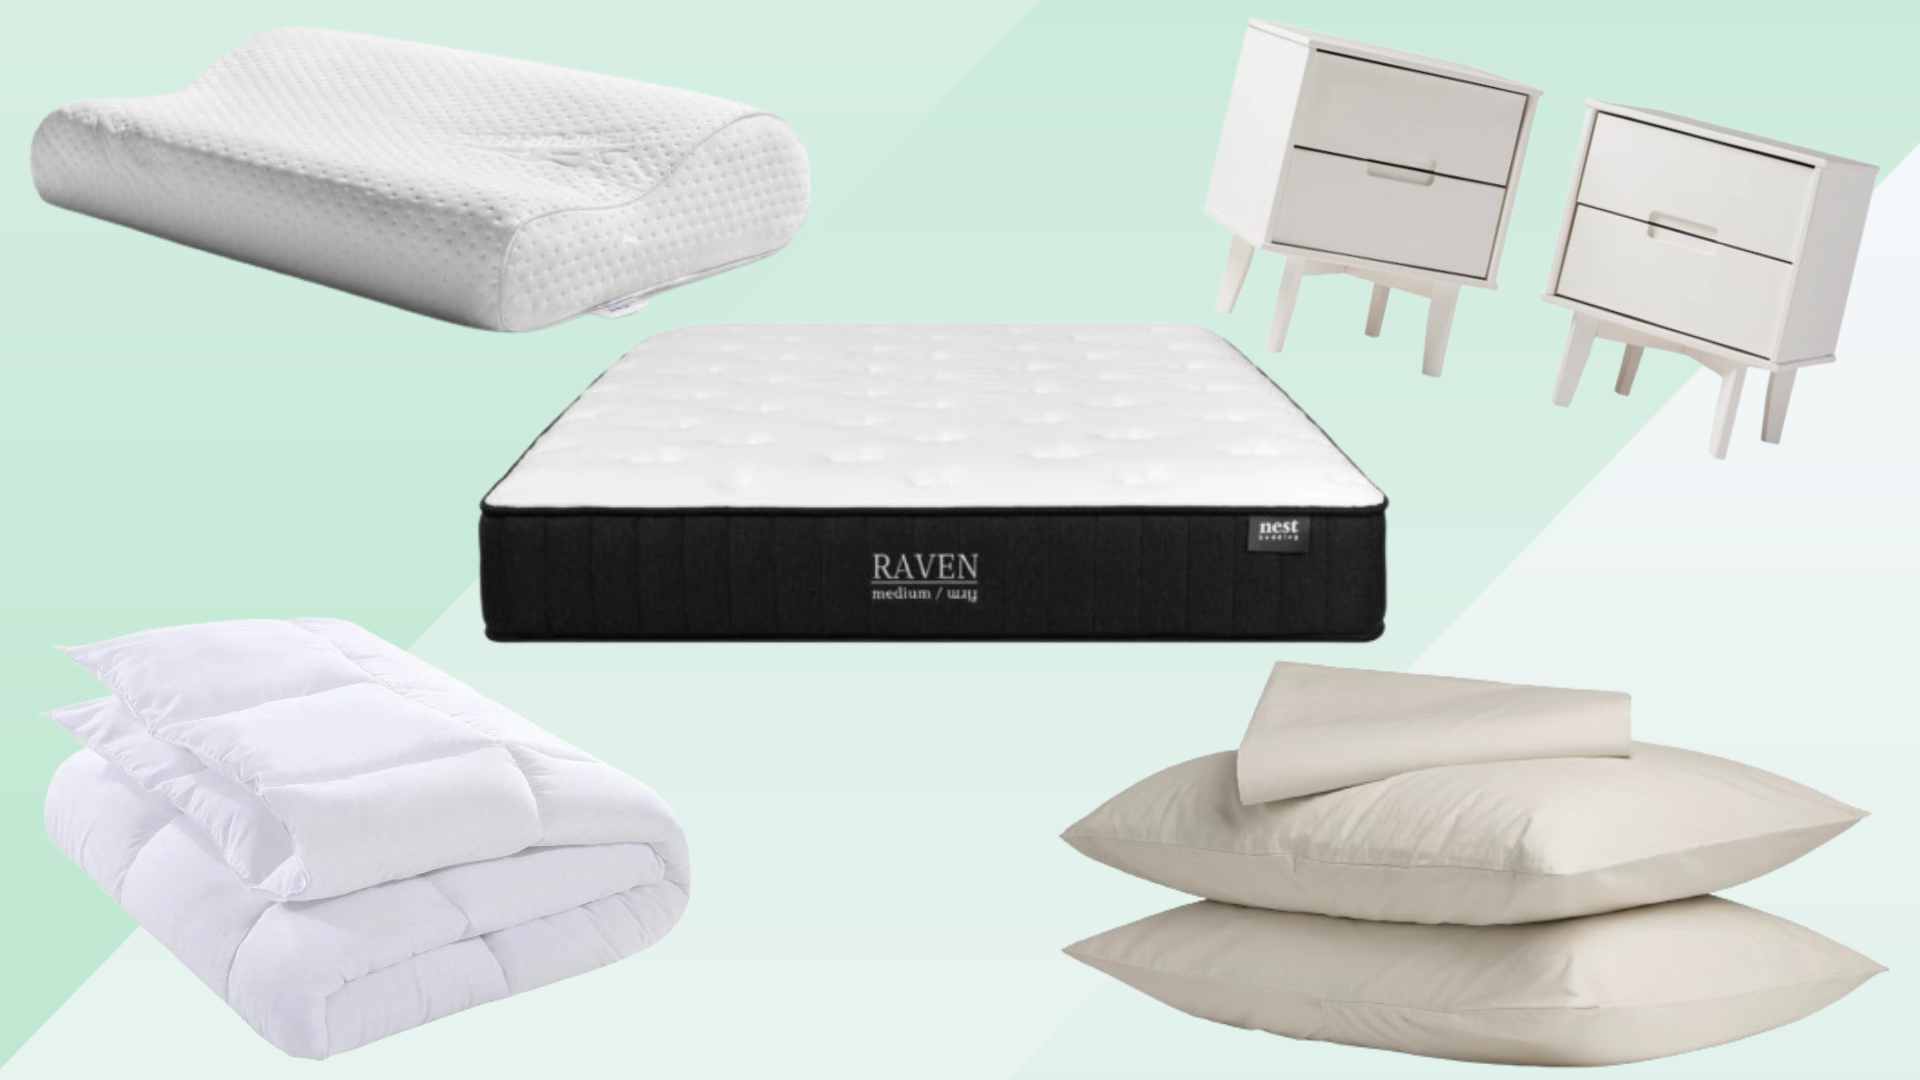 These Memorial Day mattress and bedding deals have us wide awake: Save up to 80% on pillows, duvets, Oprah's fave sheets and more